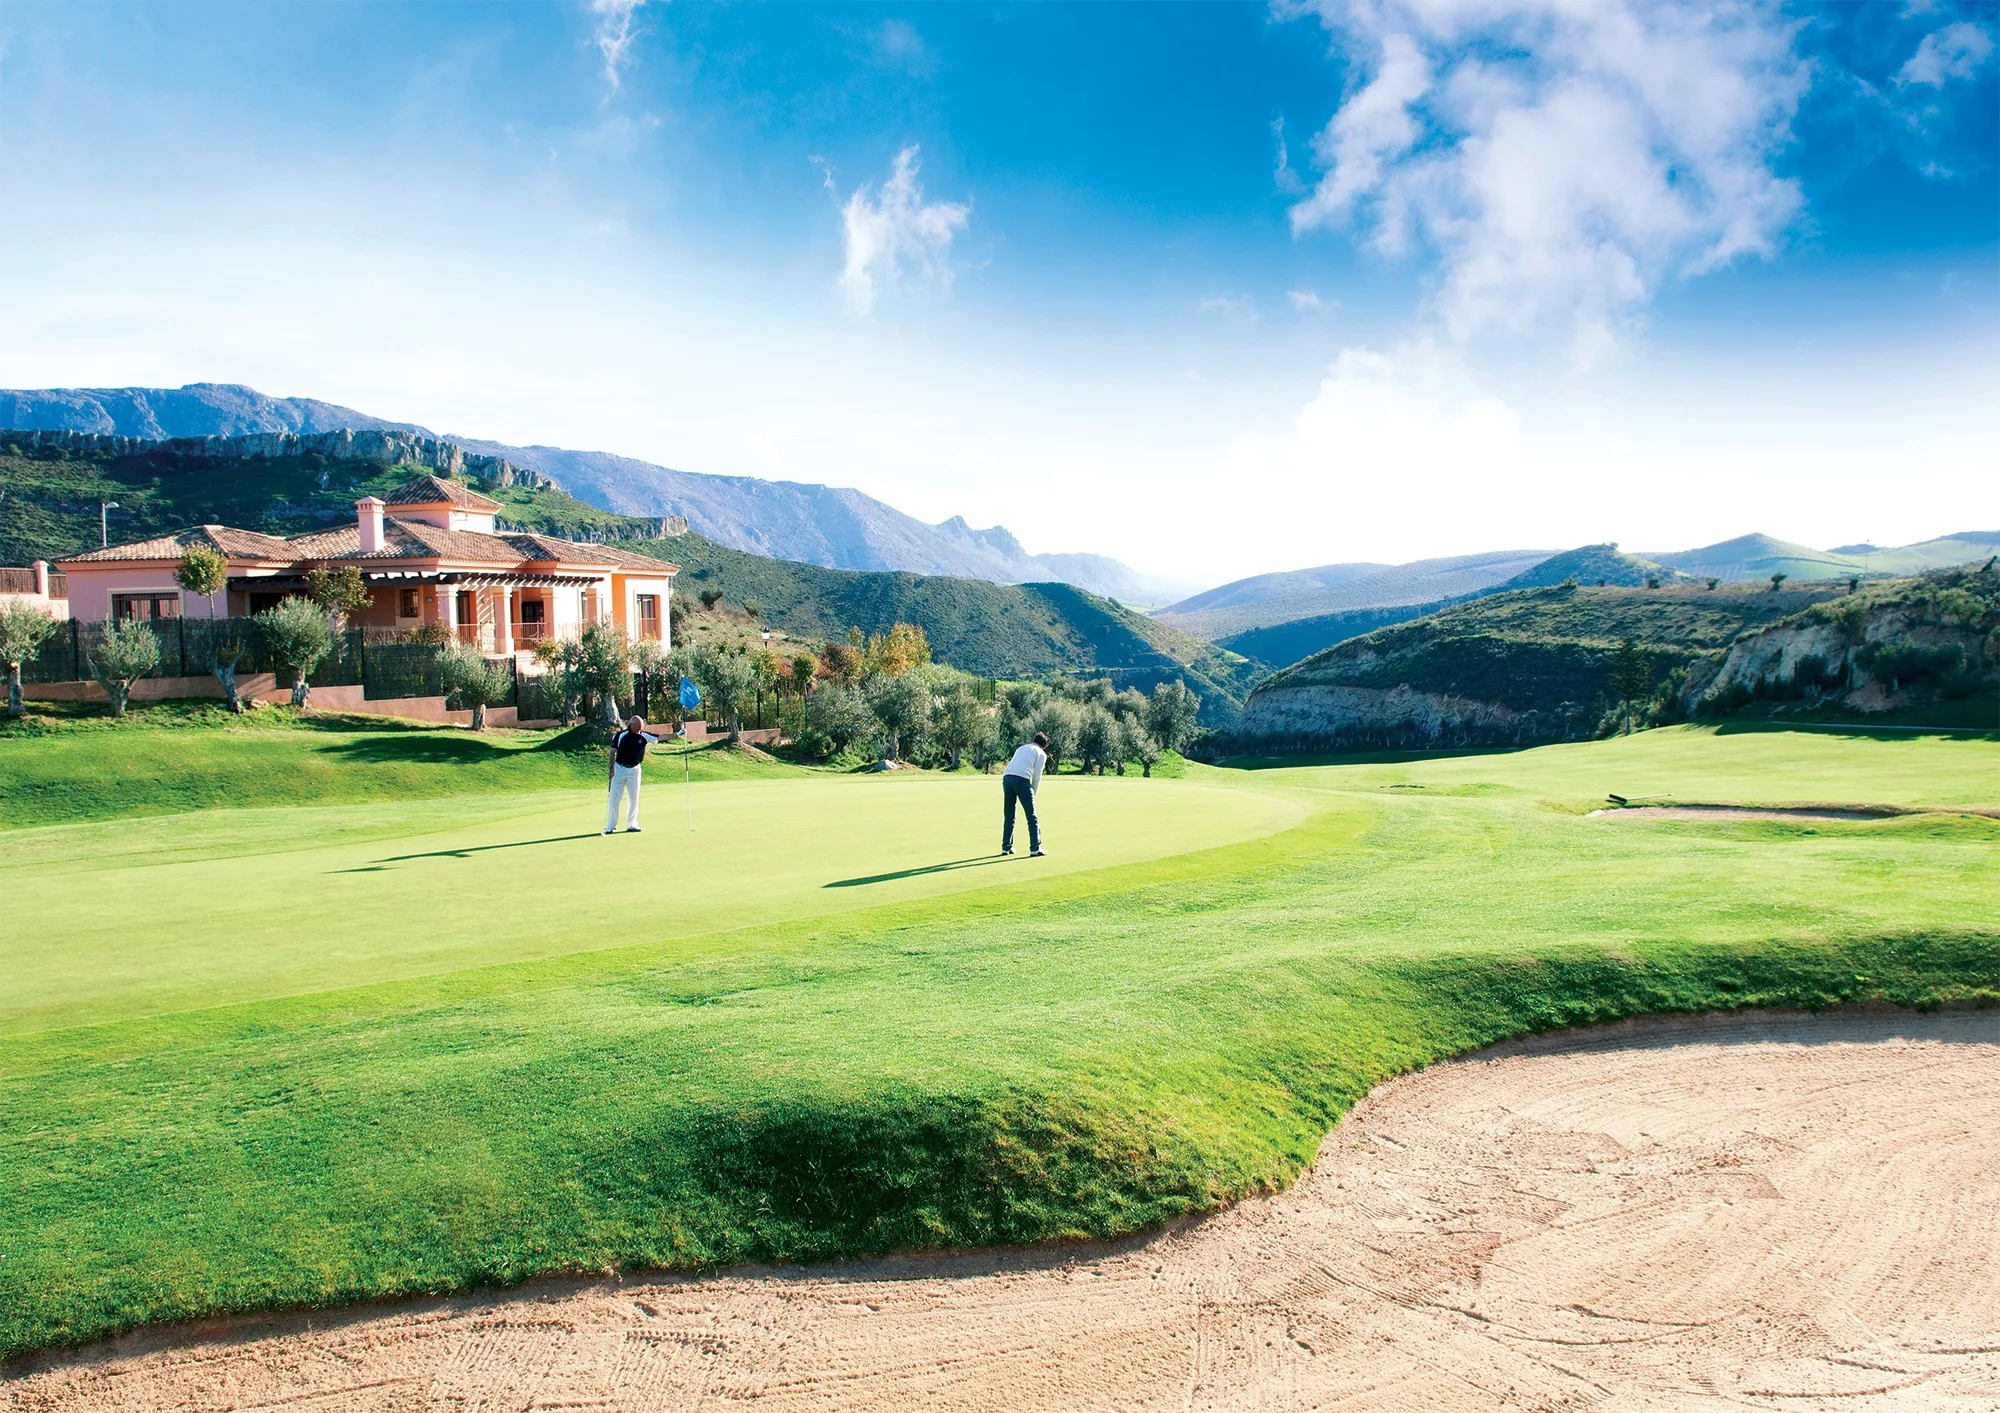 Three reasons to book a golf trip to the Costa Del Sol